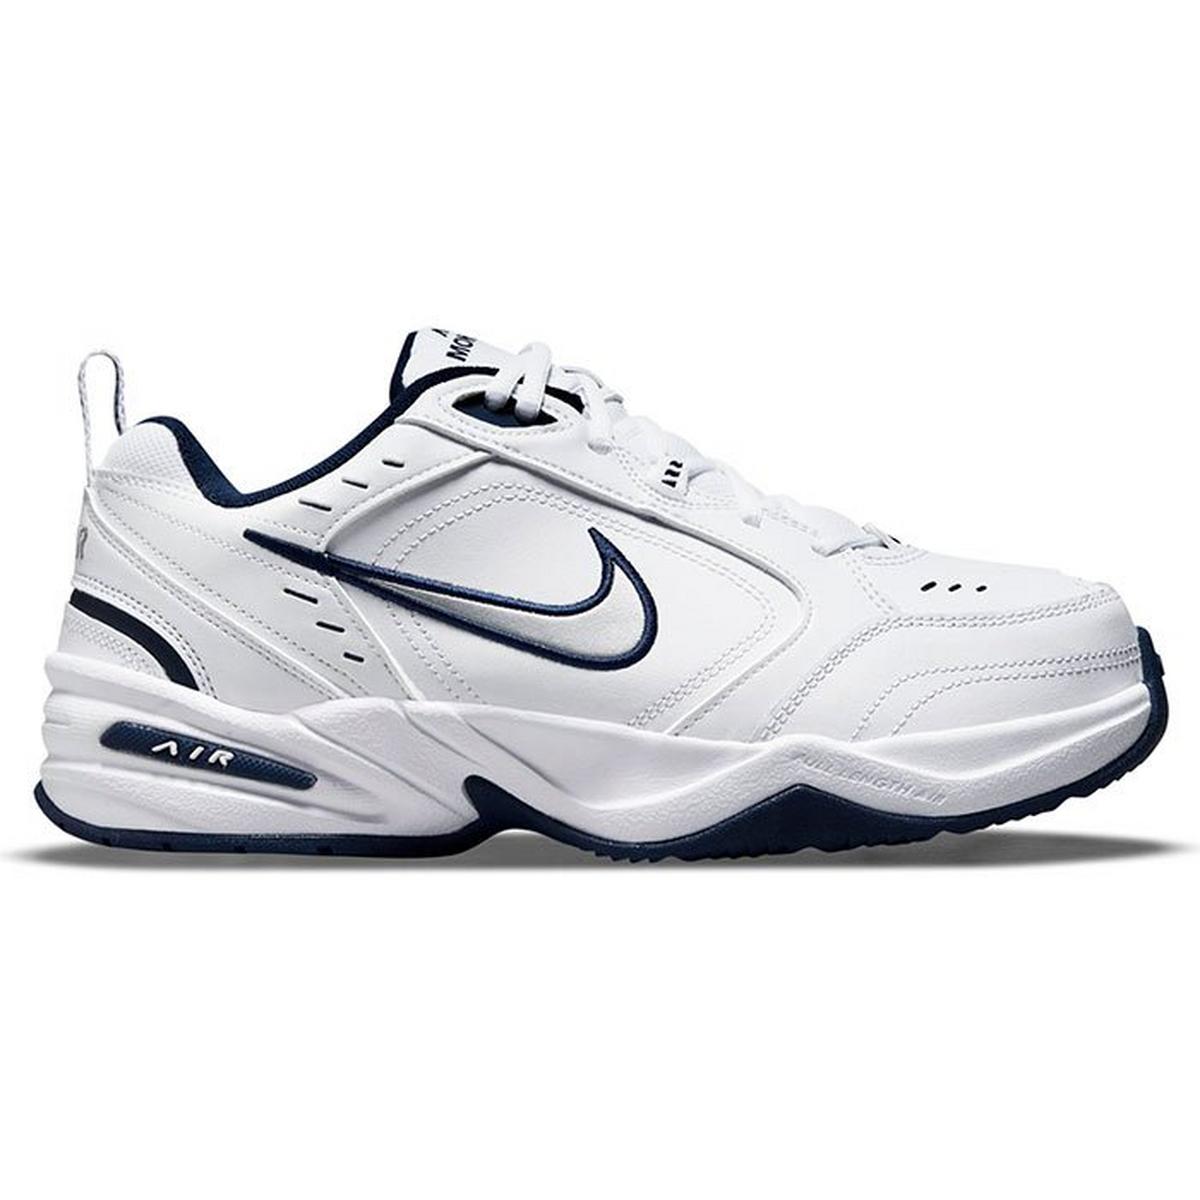 Men's Air Monarch IV Training Shoe (Extra Wide)